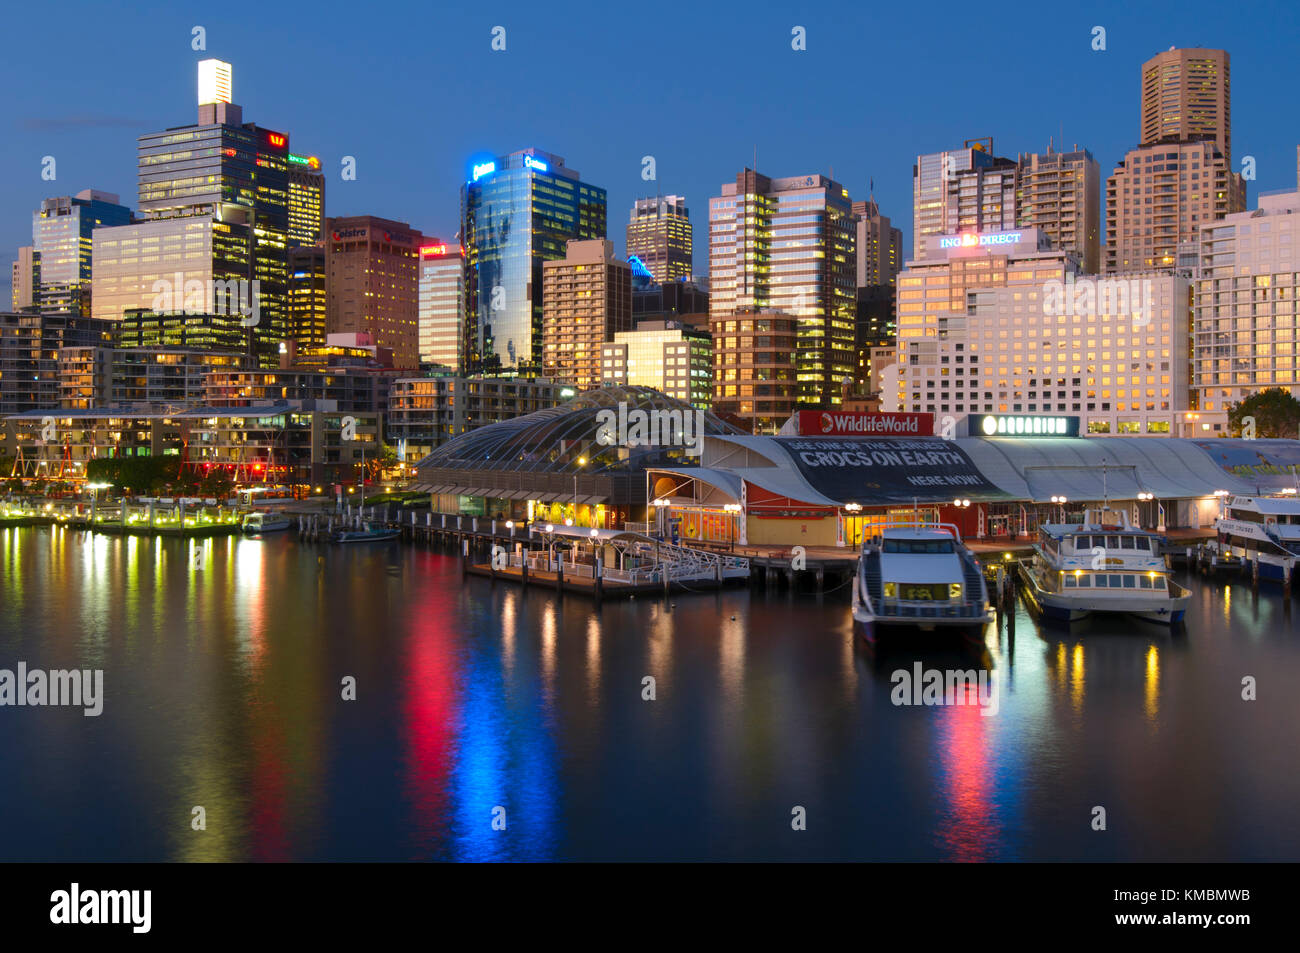 Darling Harbour at Twilight, Sydney, New South Wales, Australia Stock Photo